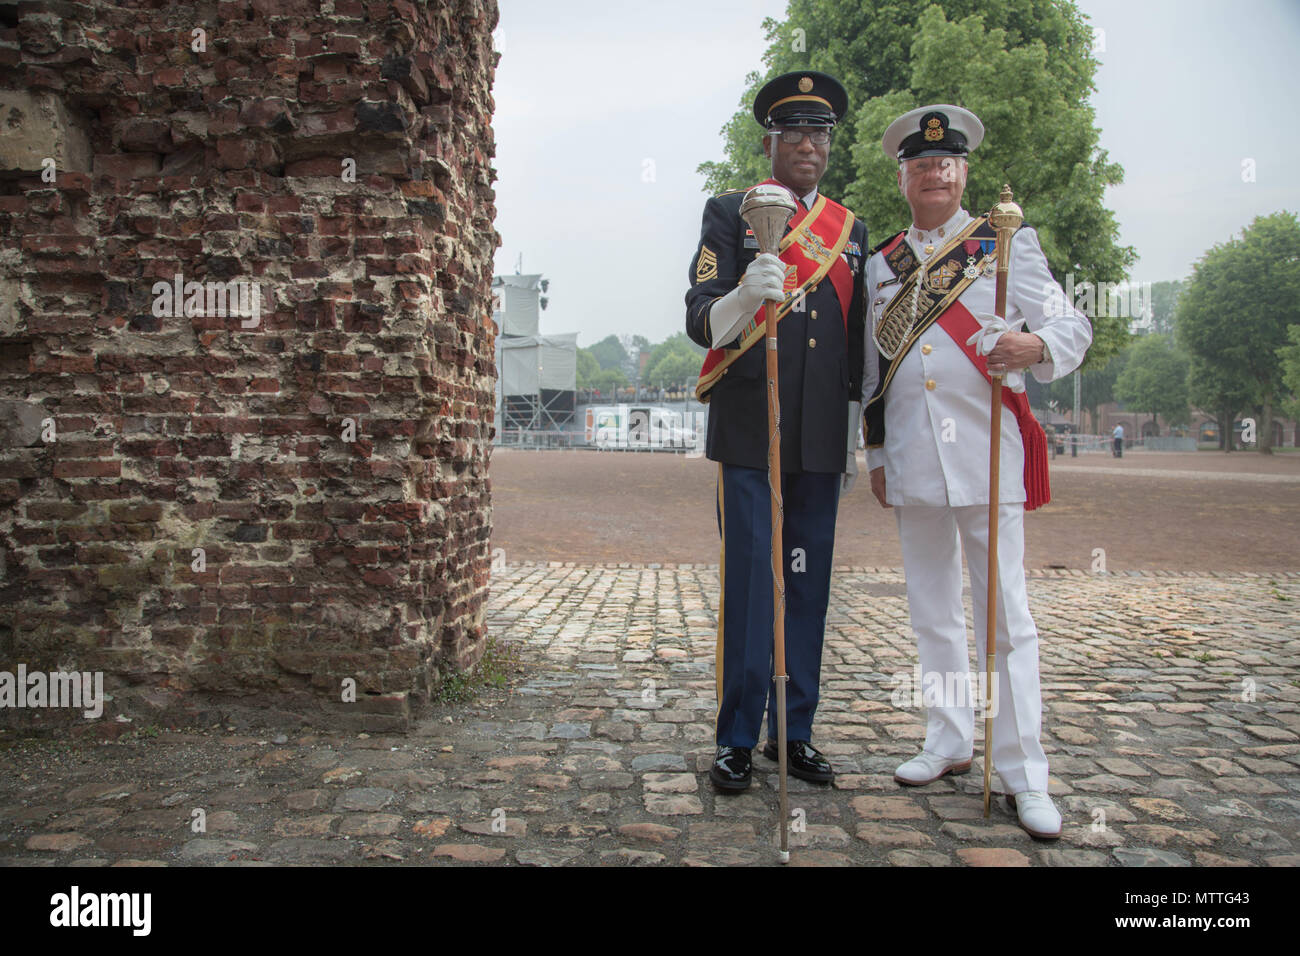 US drum major SGM Jesse L. Hughes Jr. stands alongside Major Hans Moreels of the German Heeresmusikorps during the Citadelle 350 anniversary military show, May 25, 2018, Lille, France.  US Army photo by SGT Joseph Agacinski/released. Stock Photo